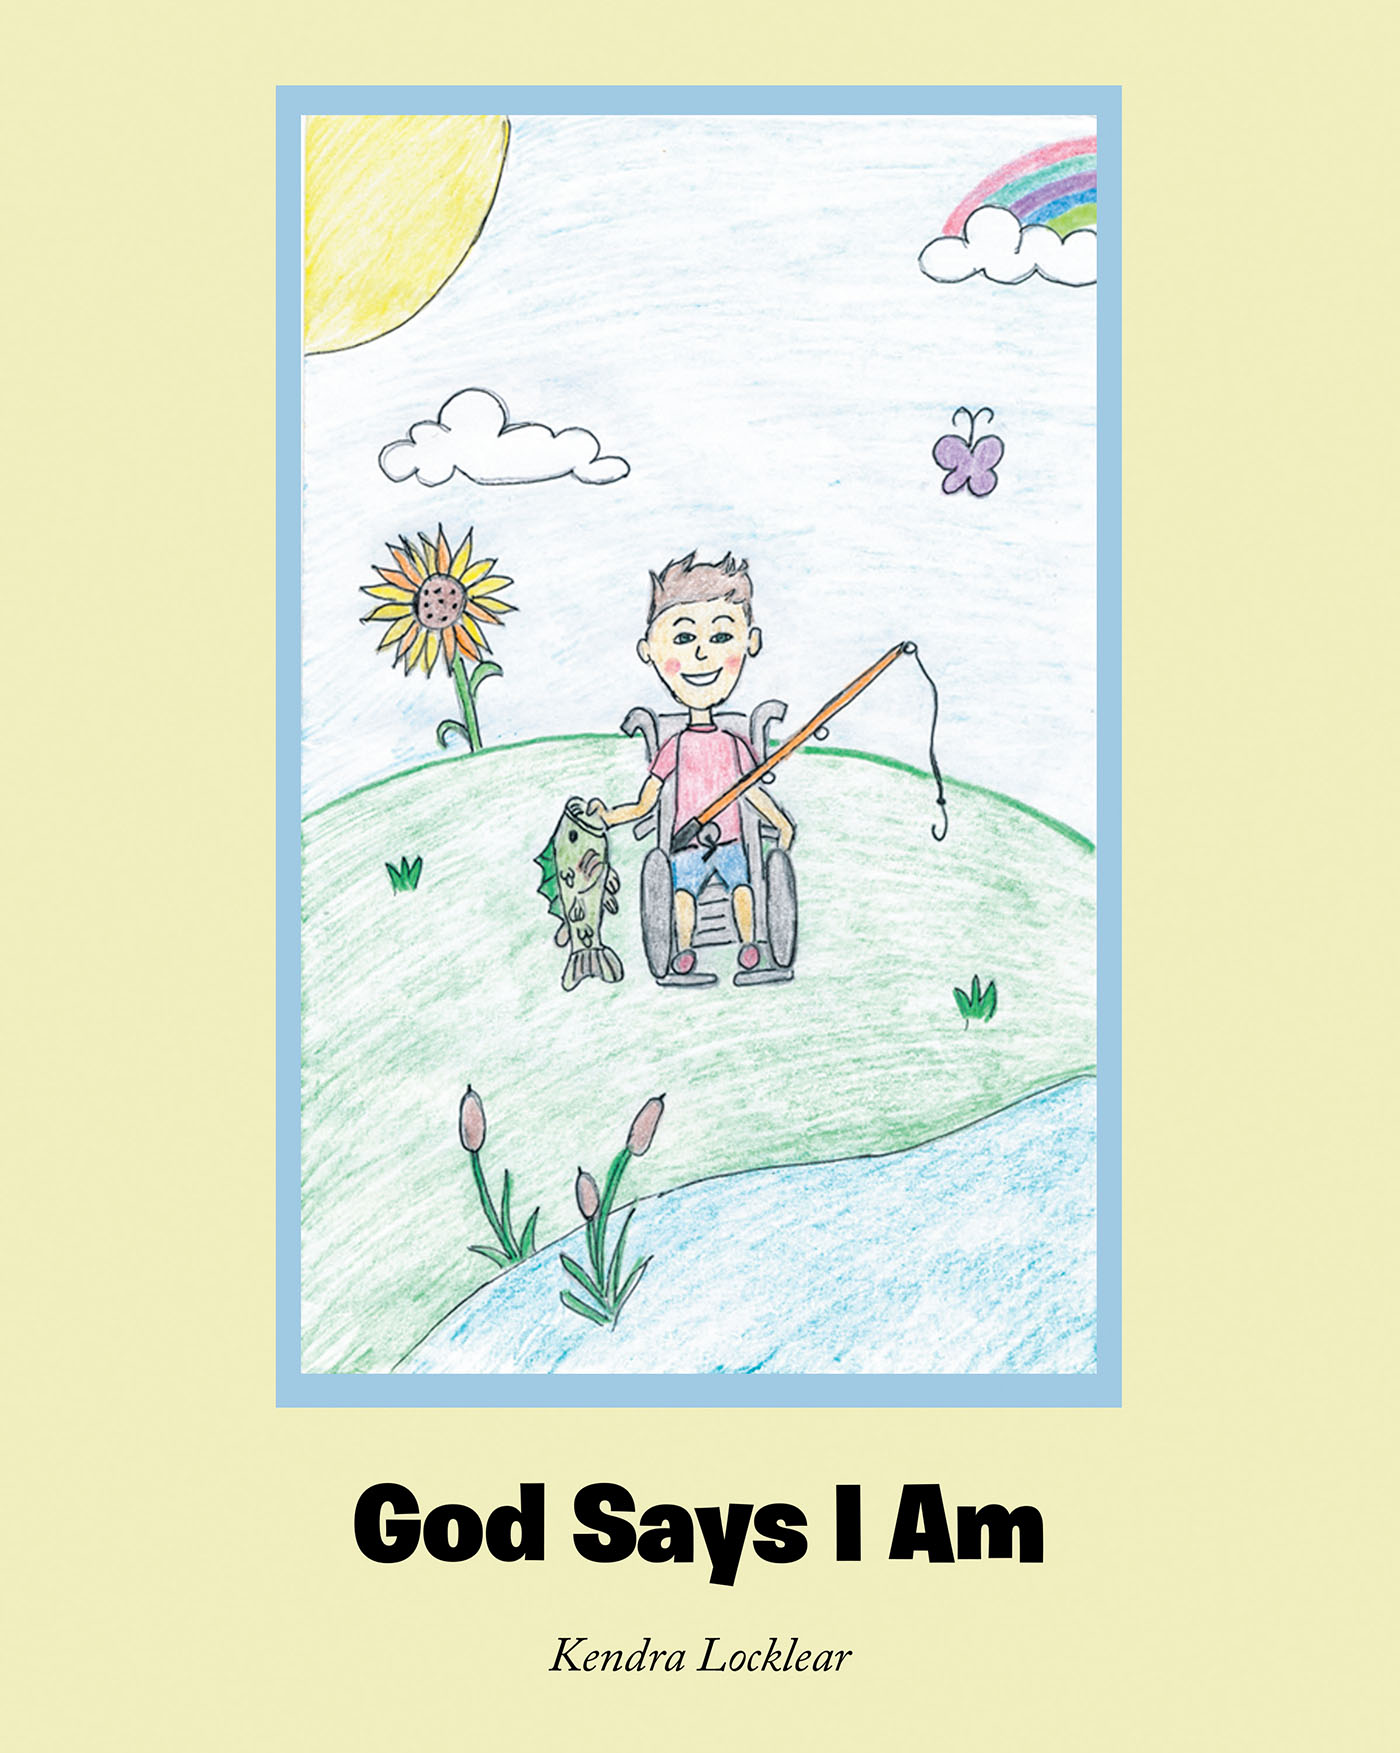 Kendra Locklear’s Newly Released "God Says I Am" is a Charming Children’s Work That Celebrates the Wonder of Every Child